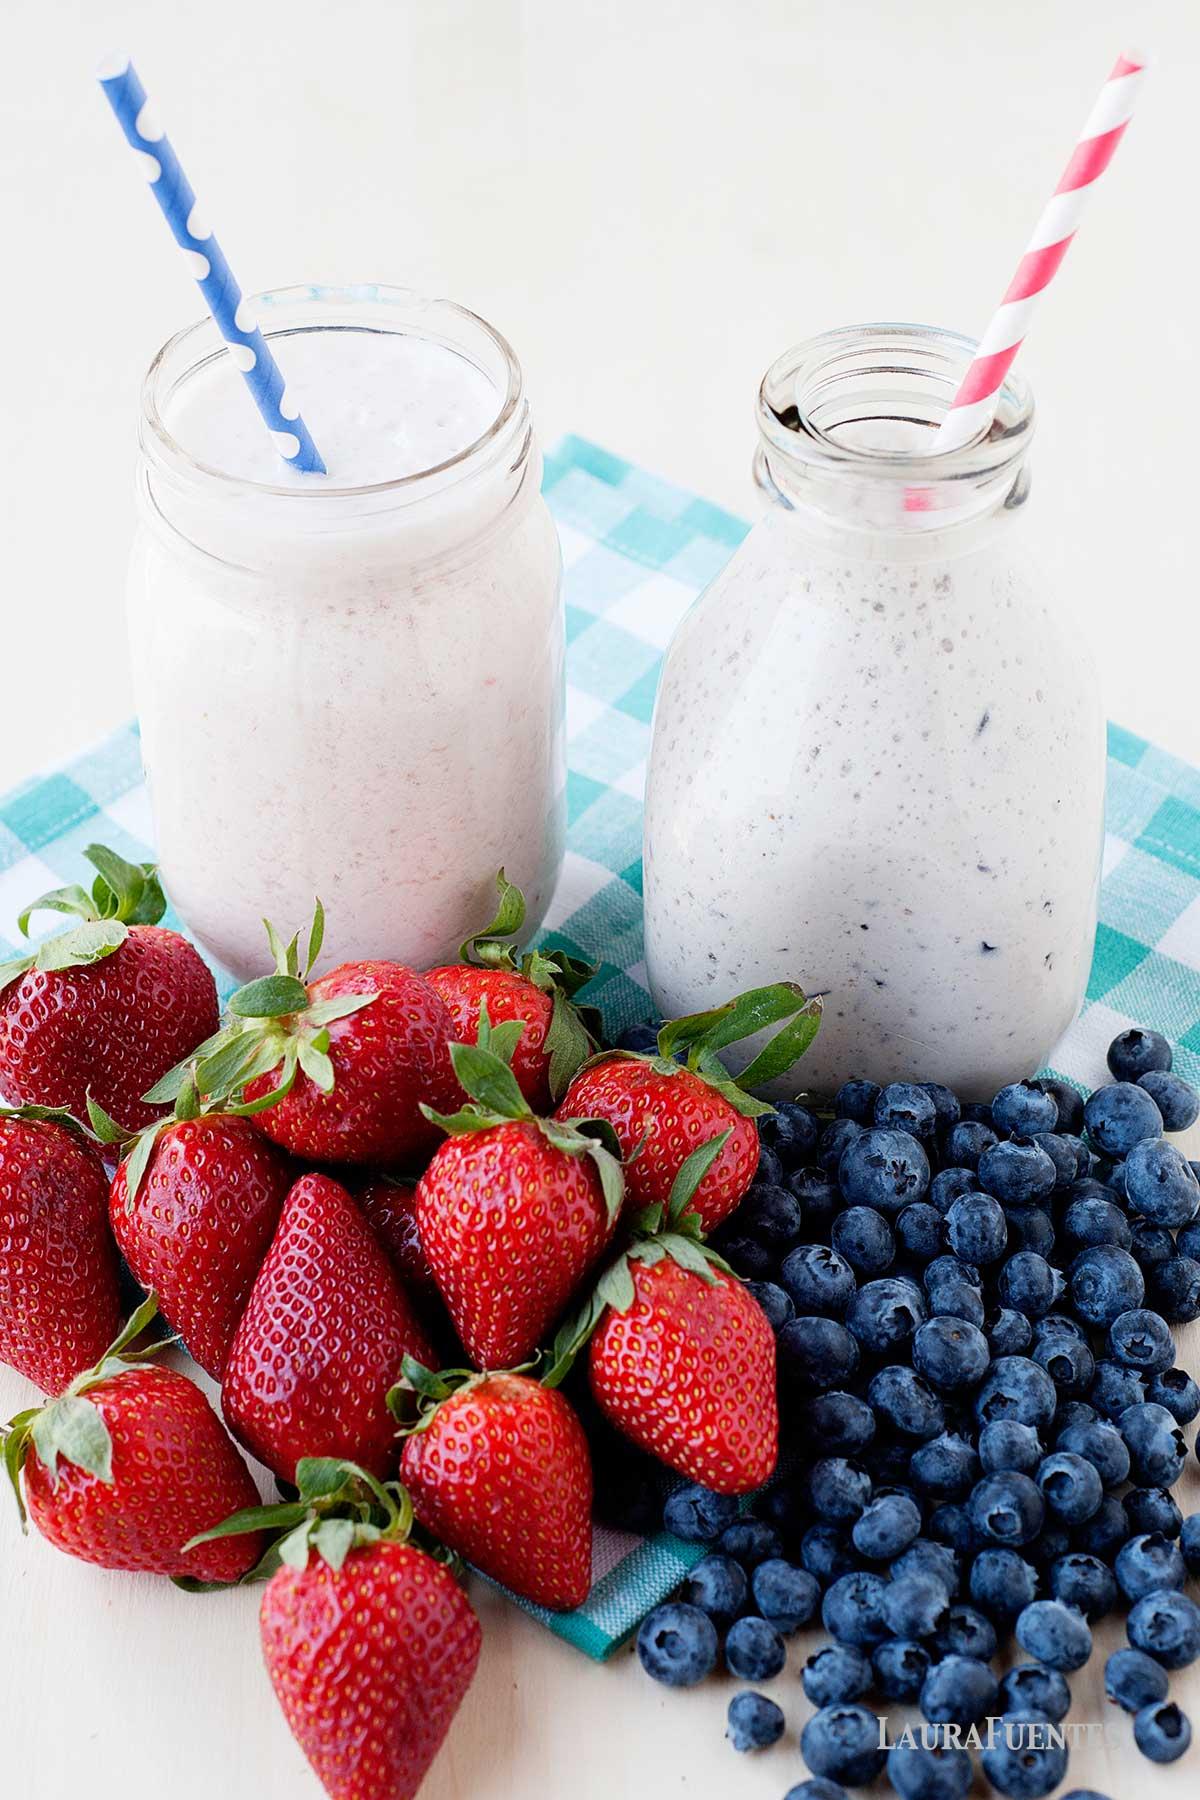 homemade yogurts in glass jars with strawberries and blueberries in front of them